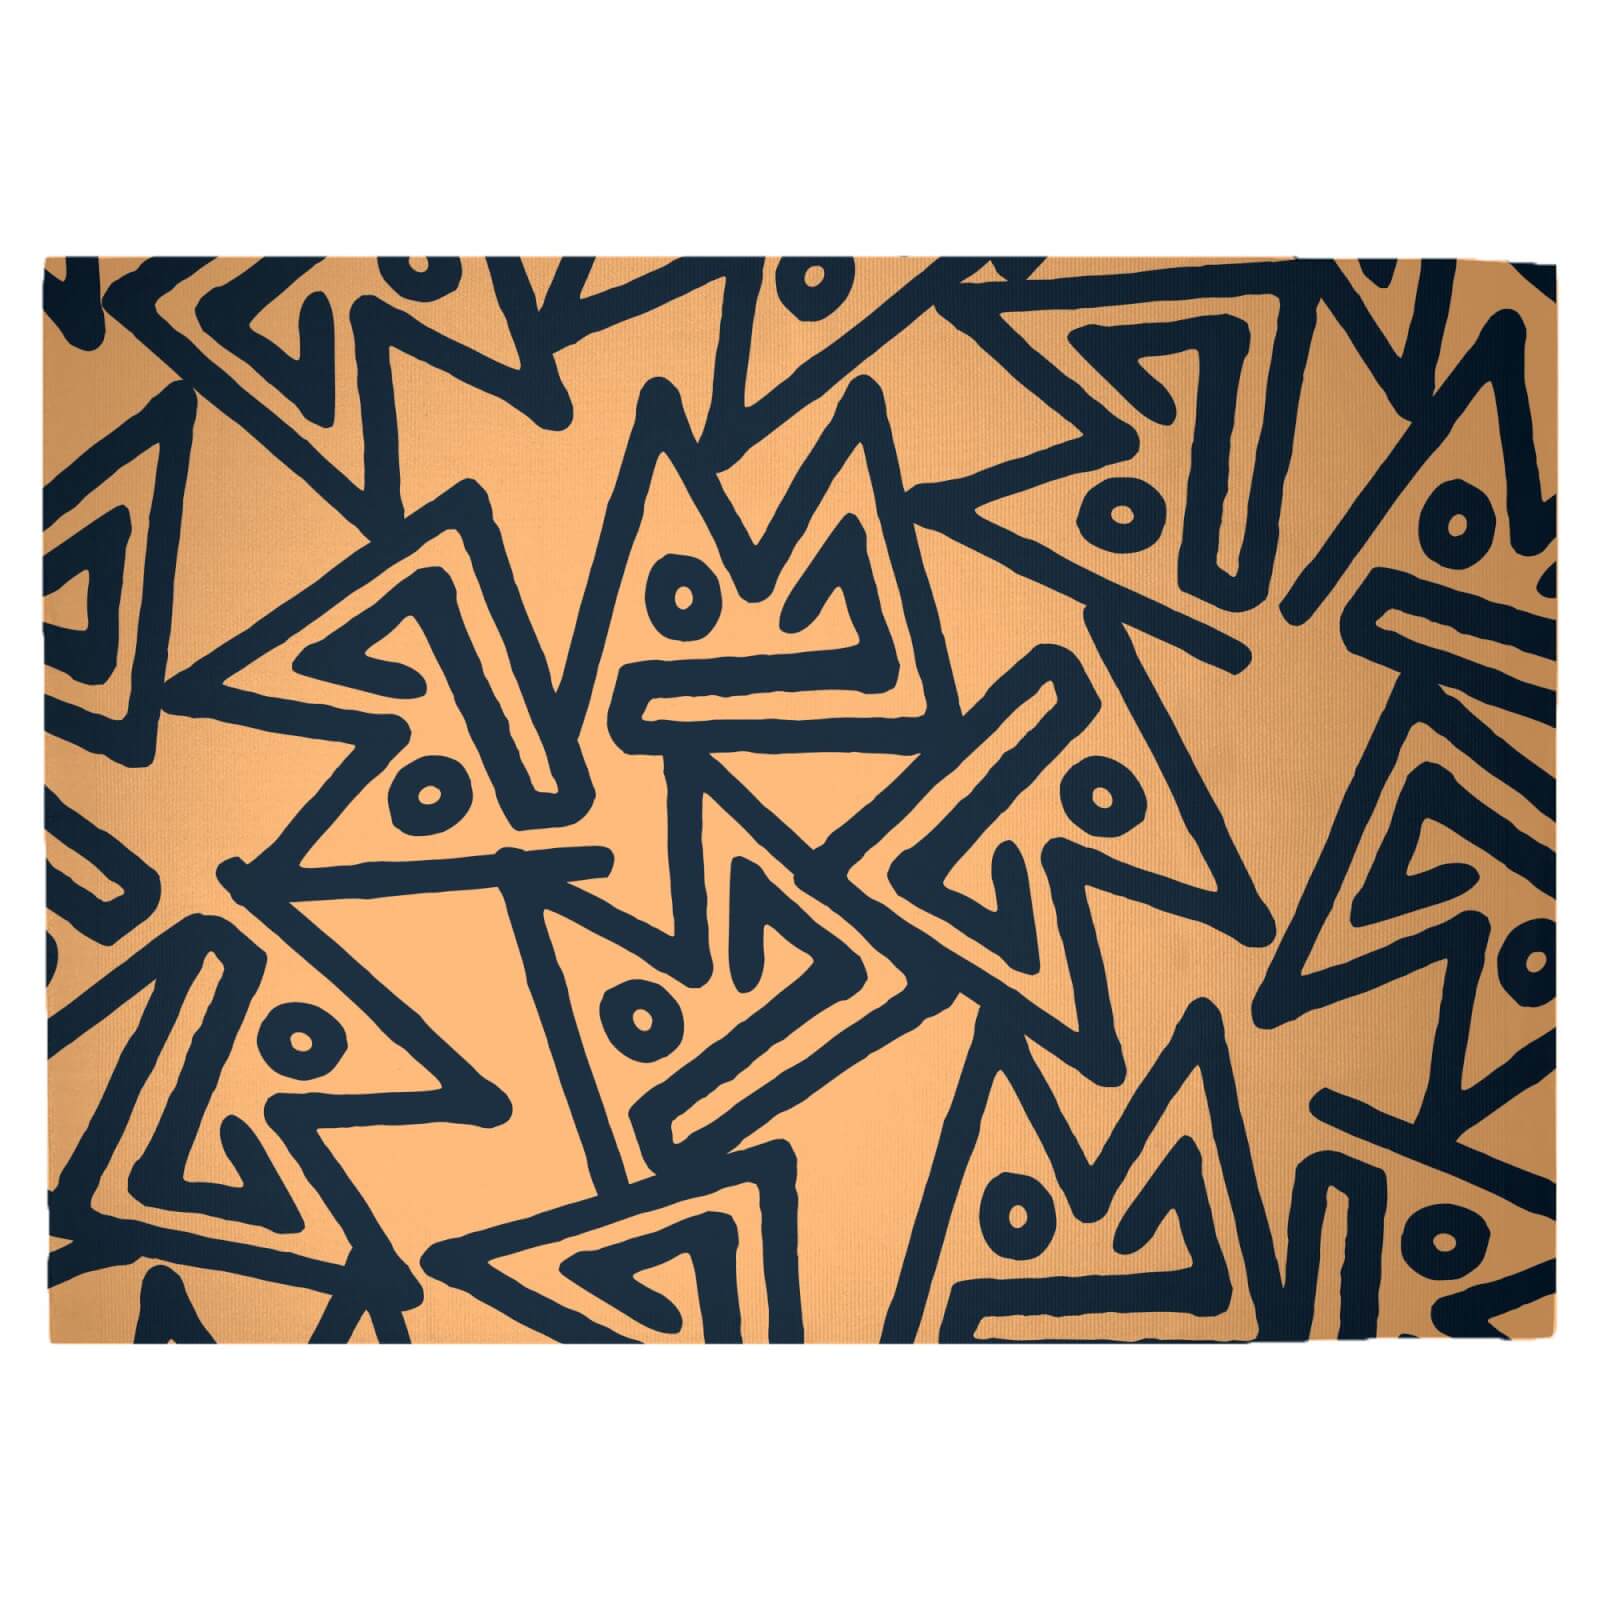 Abstract Tribal Triangular Pattern Woven Rug - Large